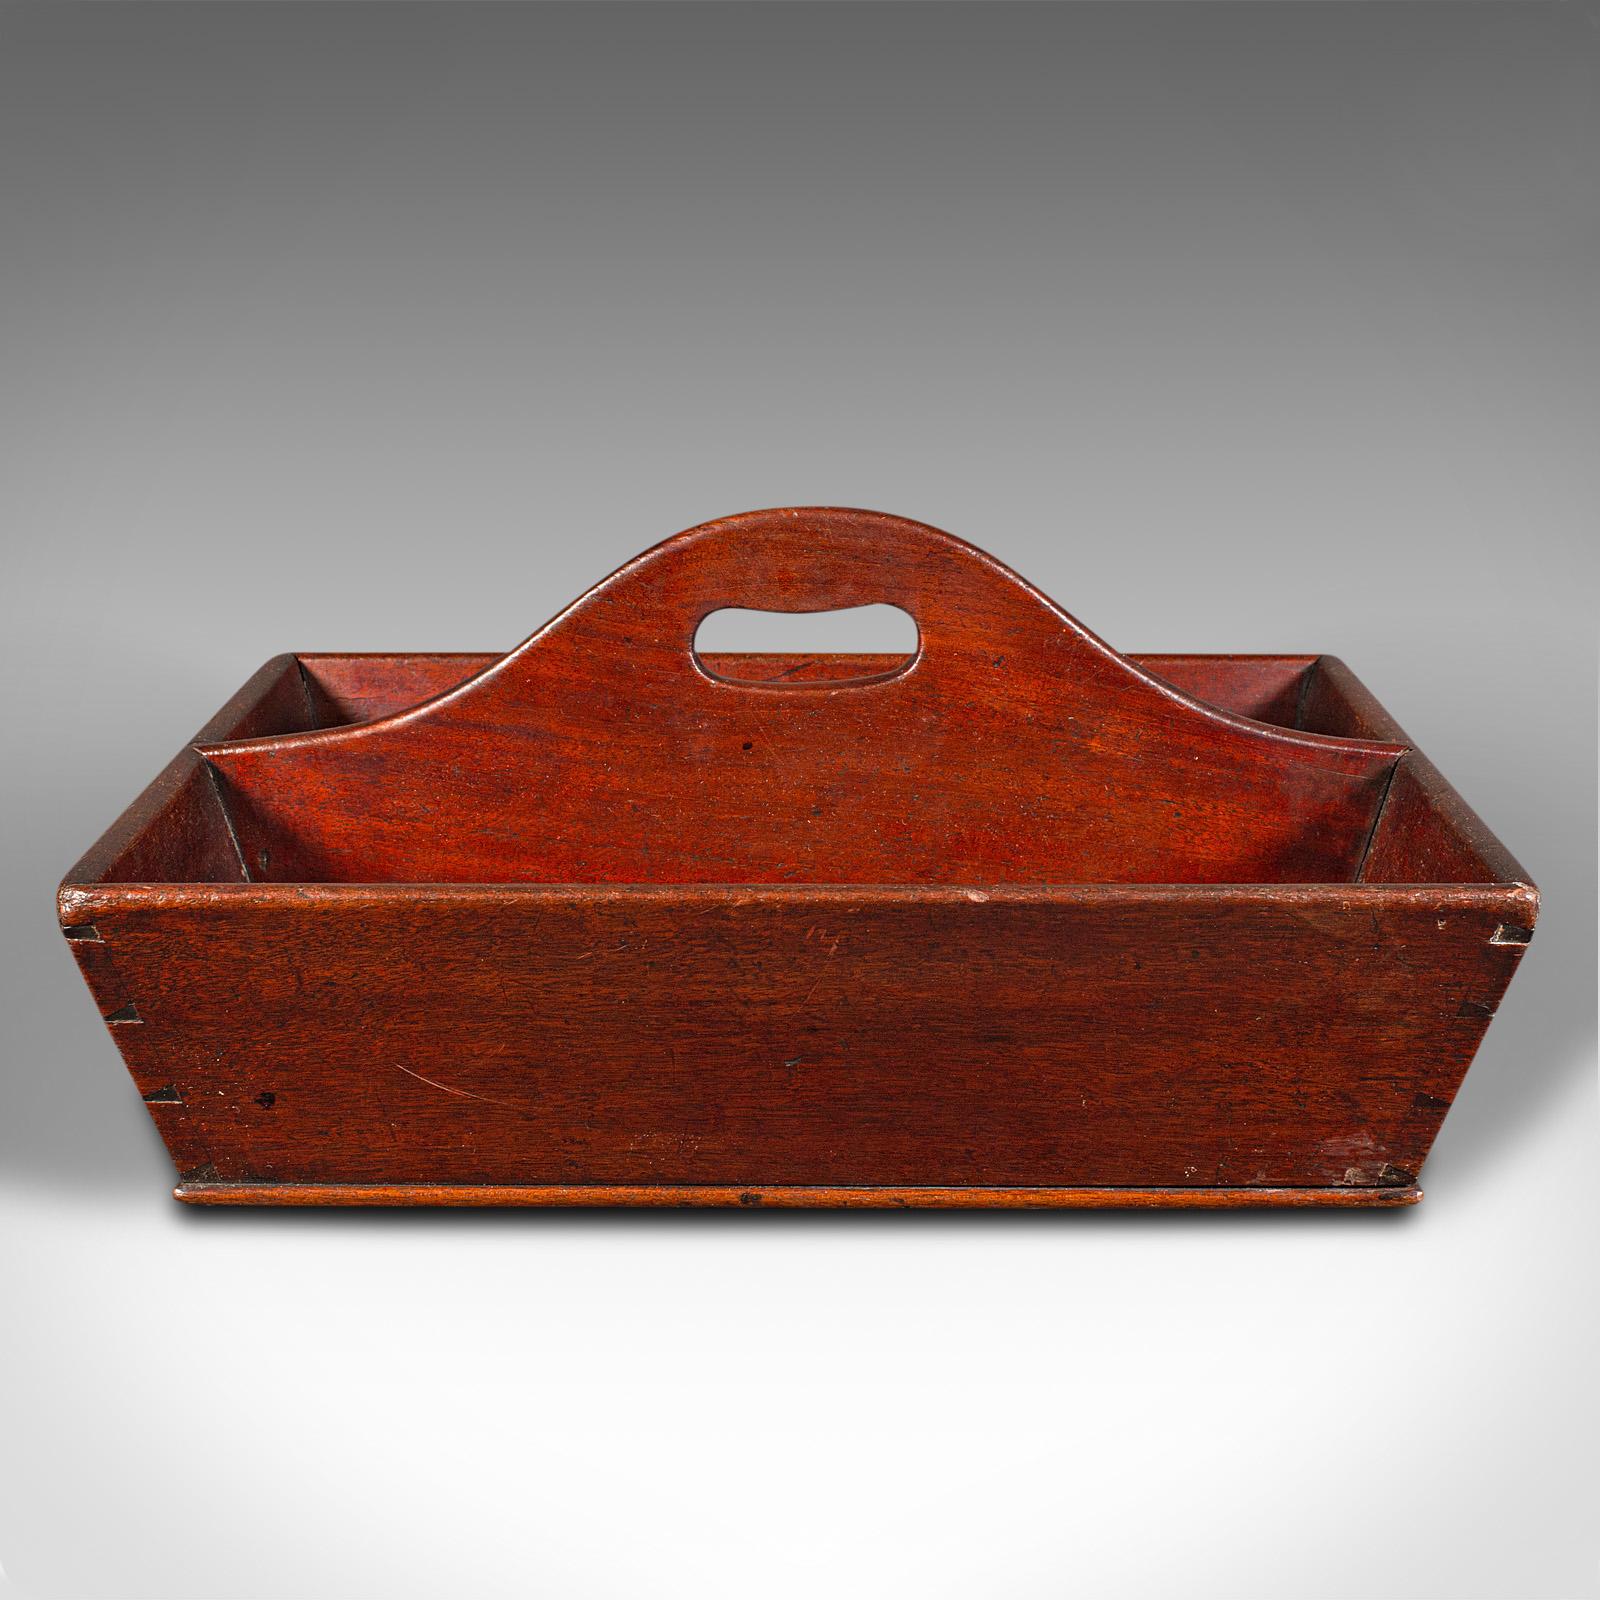 This is an antique butler's duties trug. An English, mahogany two division cutlery tray, dating to the Georgian period, circa 1800.

Fine example of practical Georgian craftsmanship with appealing colour
Displays a desirable aged patina and in good